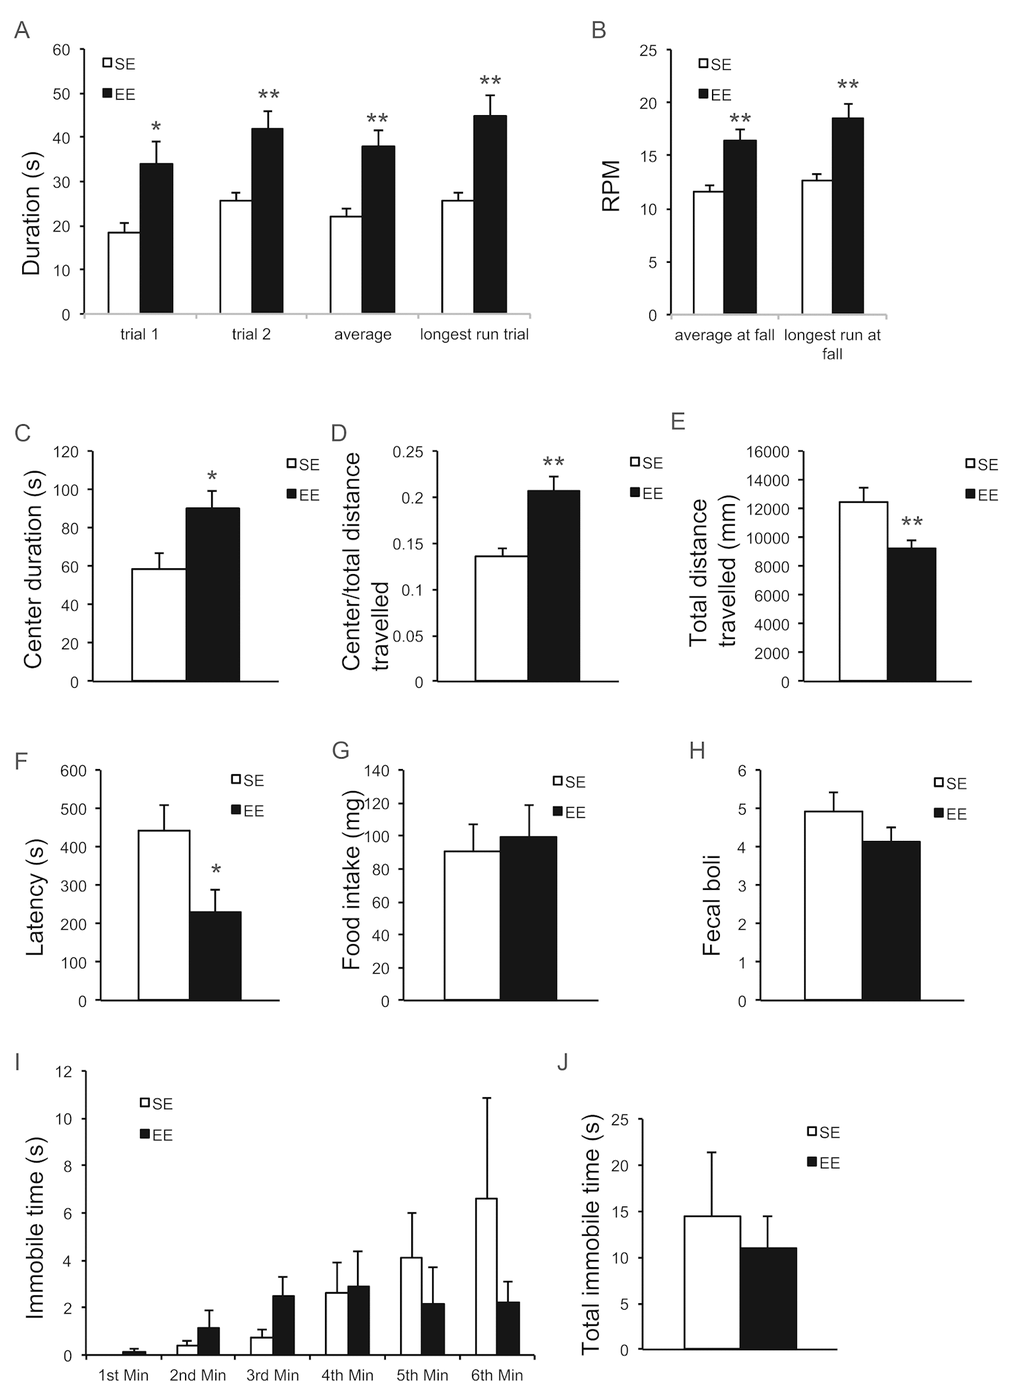 EE improves motor behavior and reduces anxiety. (A, B) Rotarod treadmill test at the age of 19 months after 9-month EE (n=9 per group). Time remaining on rod (A), Speed at fall (B). (C-E) Open field test at the age of 12 months after 2-month EE (n=10 per group). Time spent at the center of arena (C), ratio of distance travelled in center to total distance (D), total distance travelled (E). (F, G) Novelty suppressed feeding test at the age of 20 months after 10-month EE (n=10 SE, n=9 EE). Latency to consumption (F), food consumption in standard cage after the test (G). (H) Cold induced defecation test at the age of 19.5 months after 9.5-month EE (n=10 SE, n=9 EE). (I, J) Forced swim test at the age of 20.5 months after 10.5-month EE (n=8 per group). Immobility in each min (I), total immobility time (J). * PP